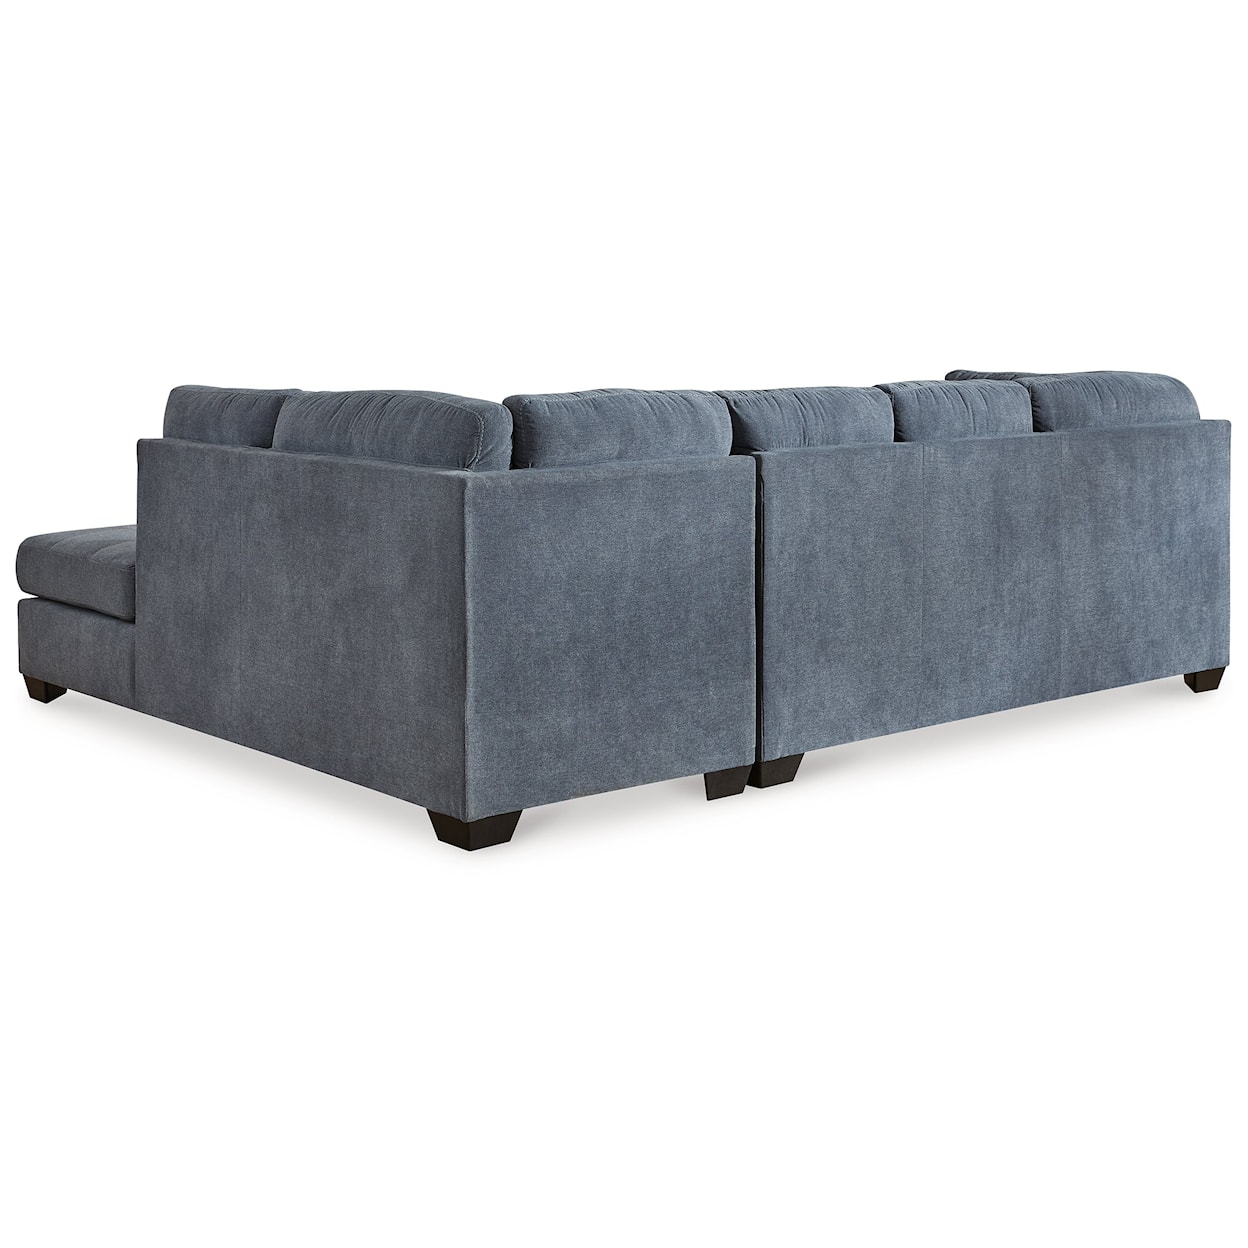 Signature Design by Ashley Marleton 2-Piece Sectional with Chaise